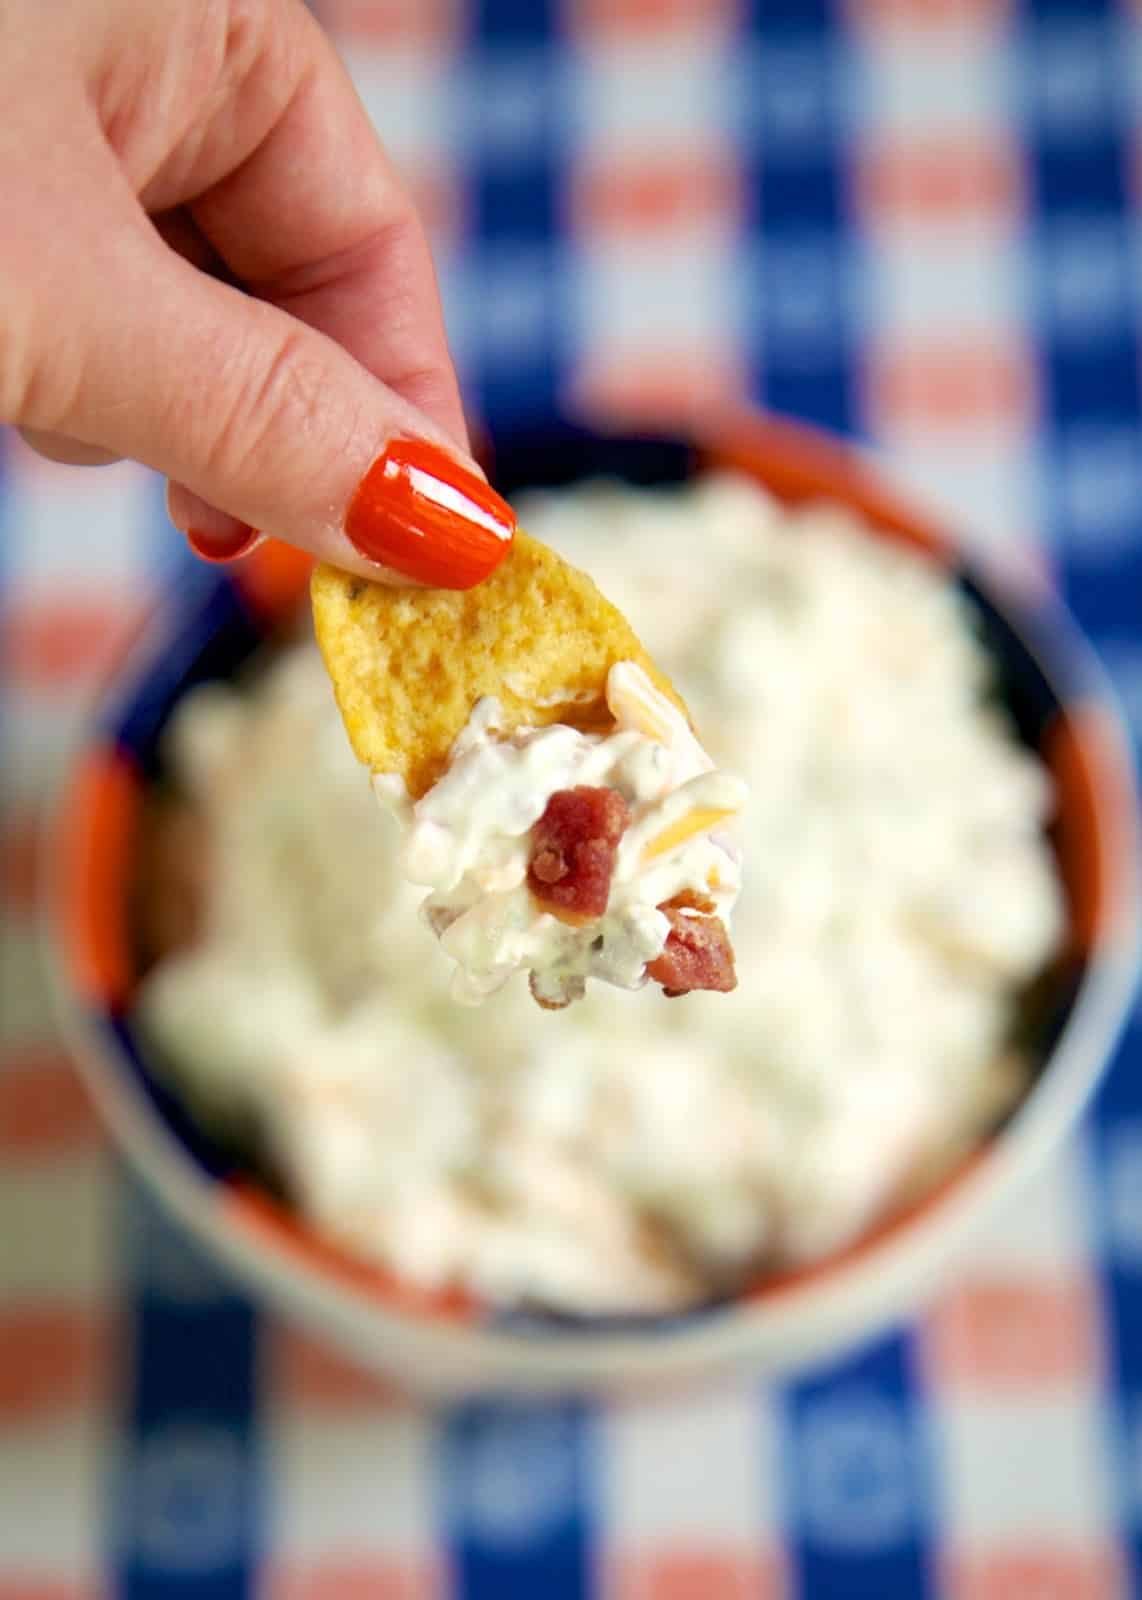 CRACK DIP - Cheddar Bacon Dip - I always double the recipe and there is never any leftovers! People go crazy for this dip!! Sour cream dip loaded with cheddar, bacon and ranch. This dip is crazy addictive!! SO good!